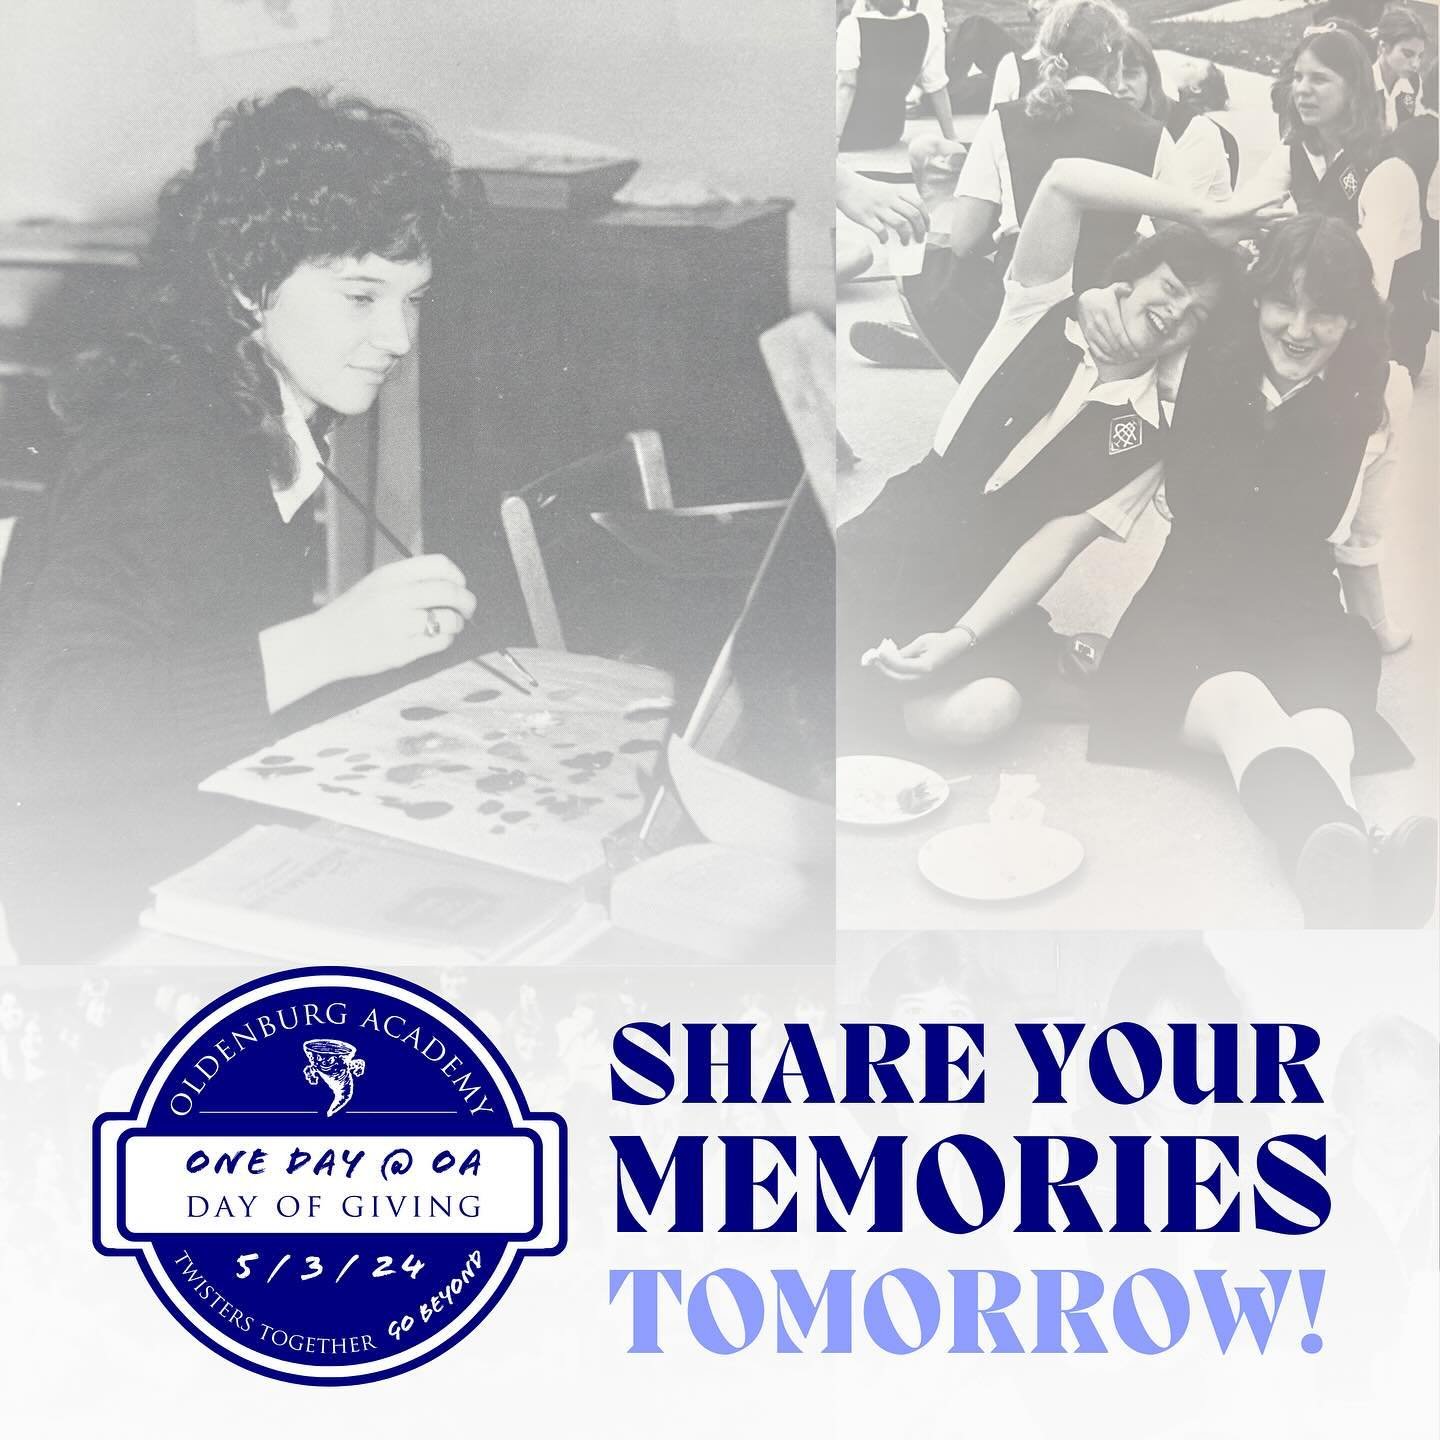 Tomorrow is One Day @ OA! 

Walking down memory lane&hellip;

We would love you to share your favorite OA photos and memories on social media&mdash;tag us so we can share them, too!